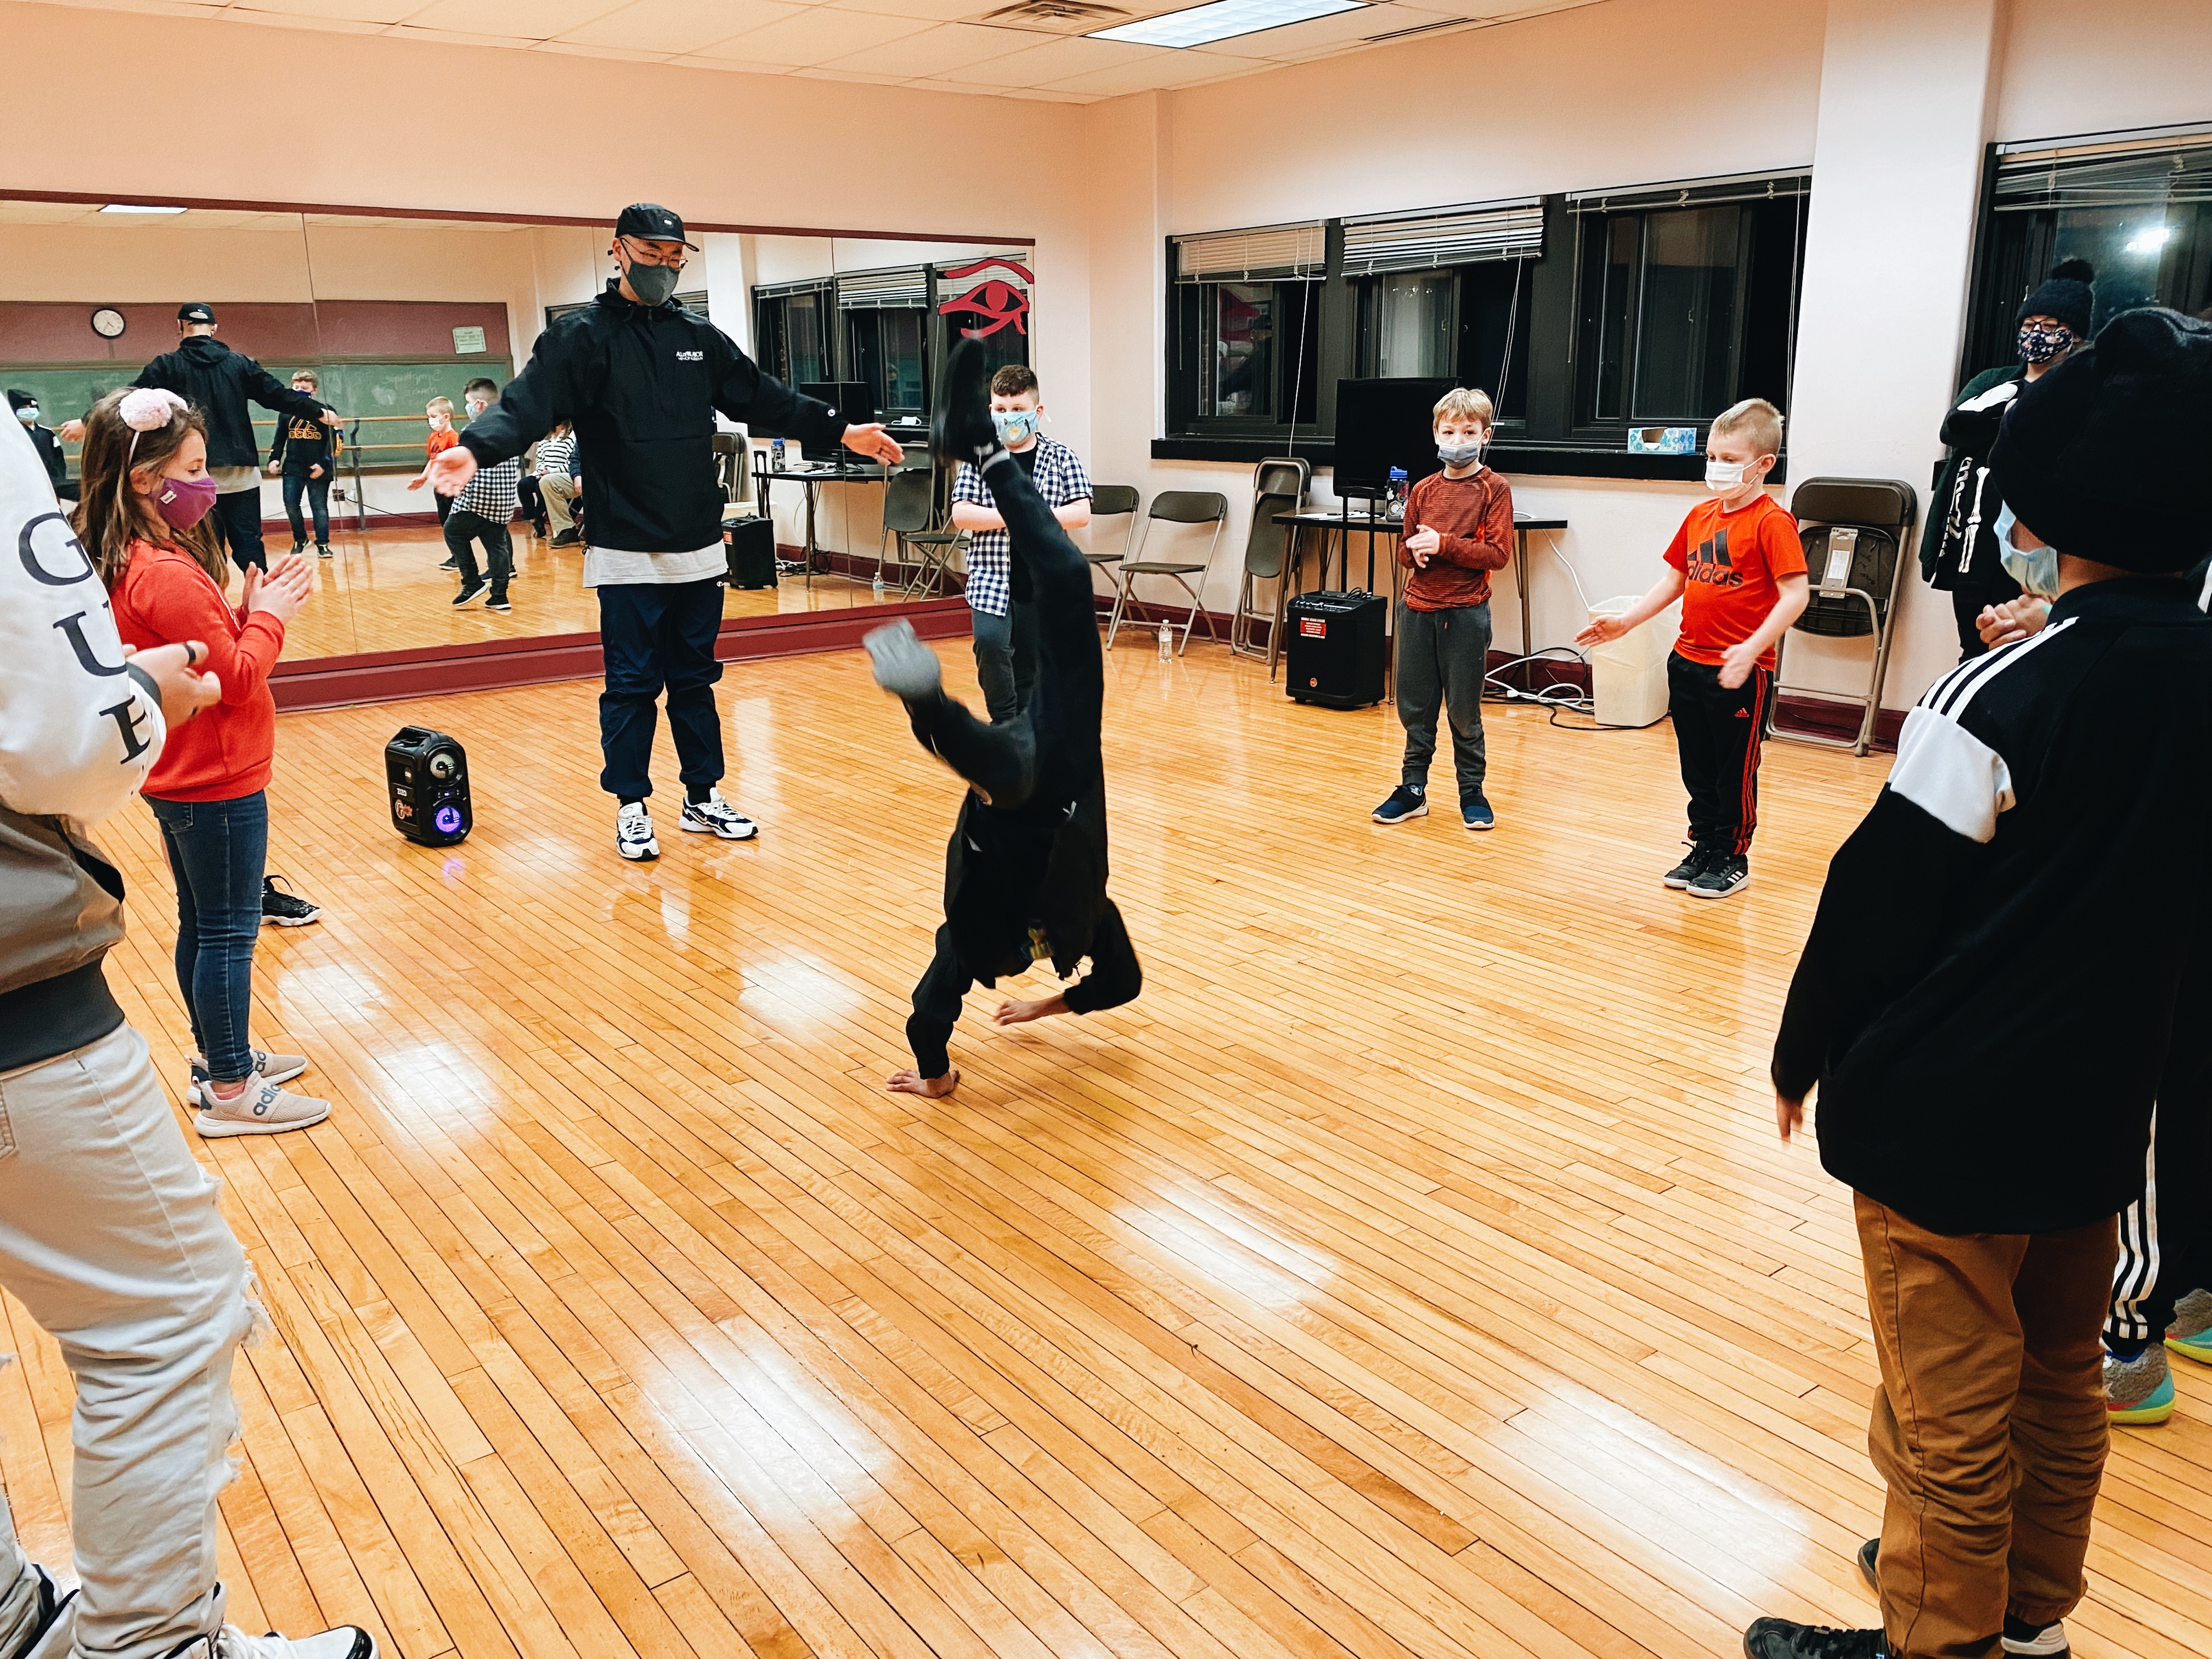 Students at All of the Above Hip Hop Academy cheer on a peer doing a trick on balanced on their hands in the middle of the dance circle